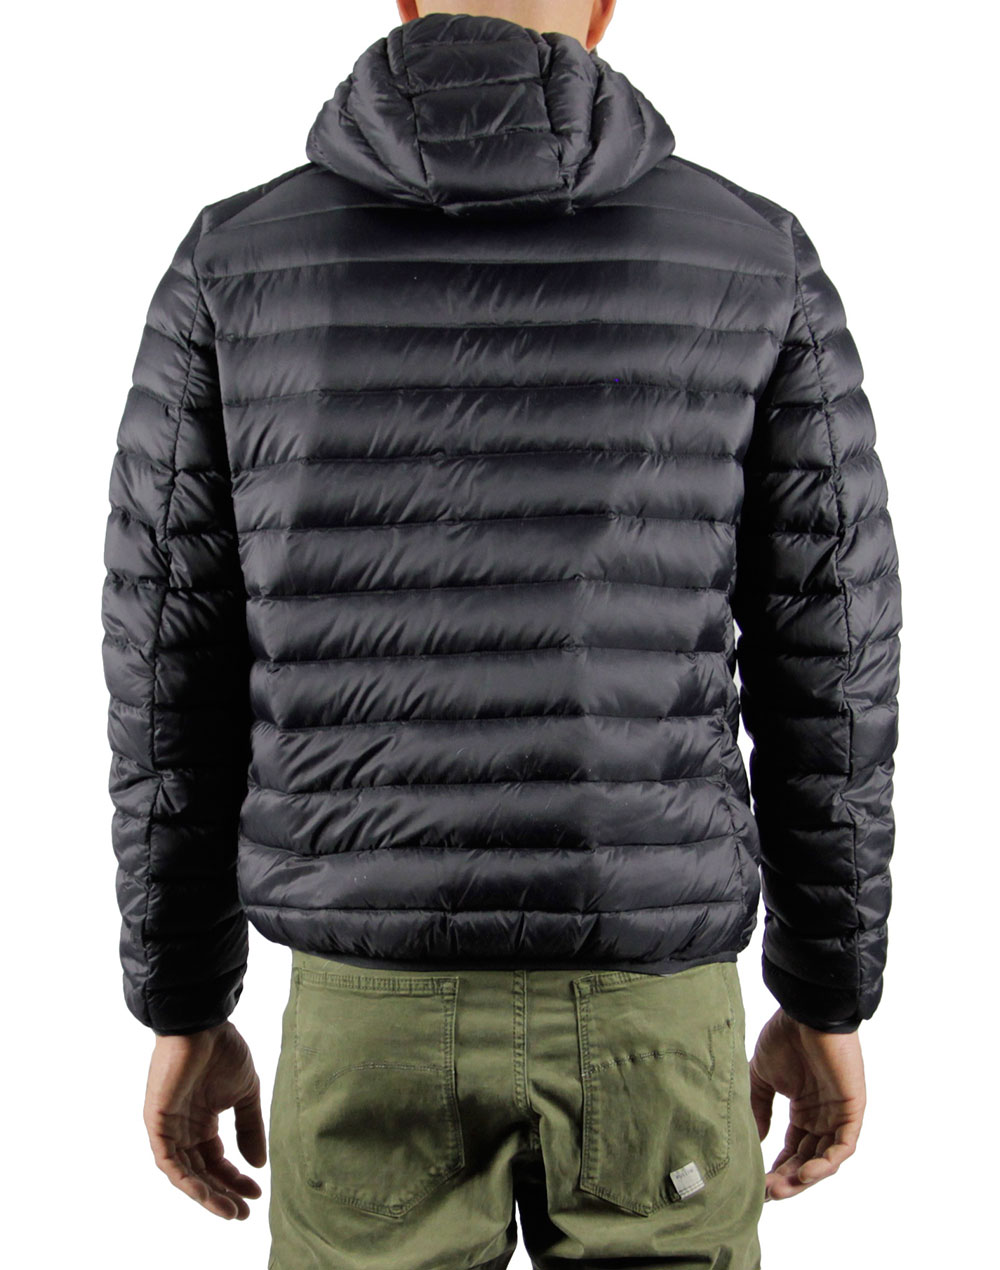 Men's feather jacket with hood LEAP